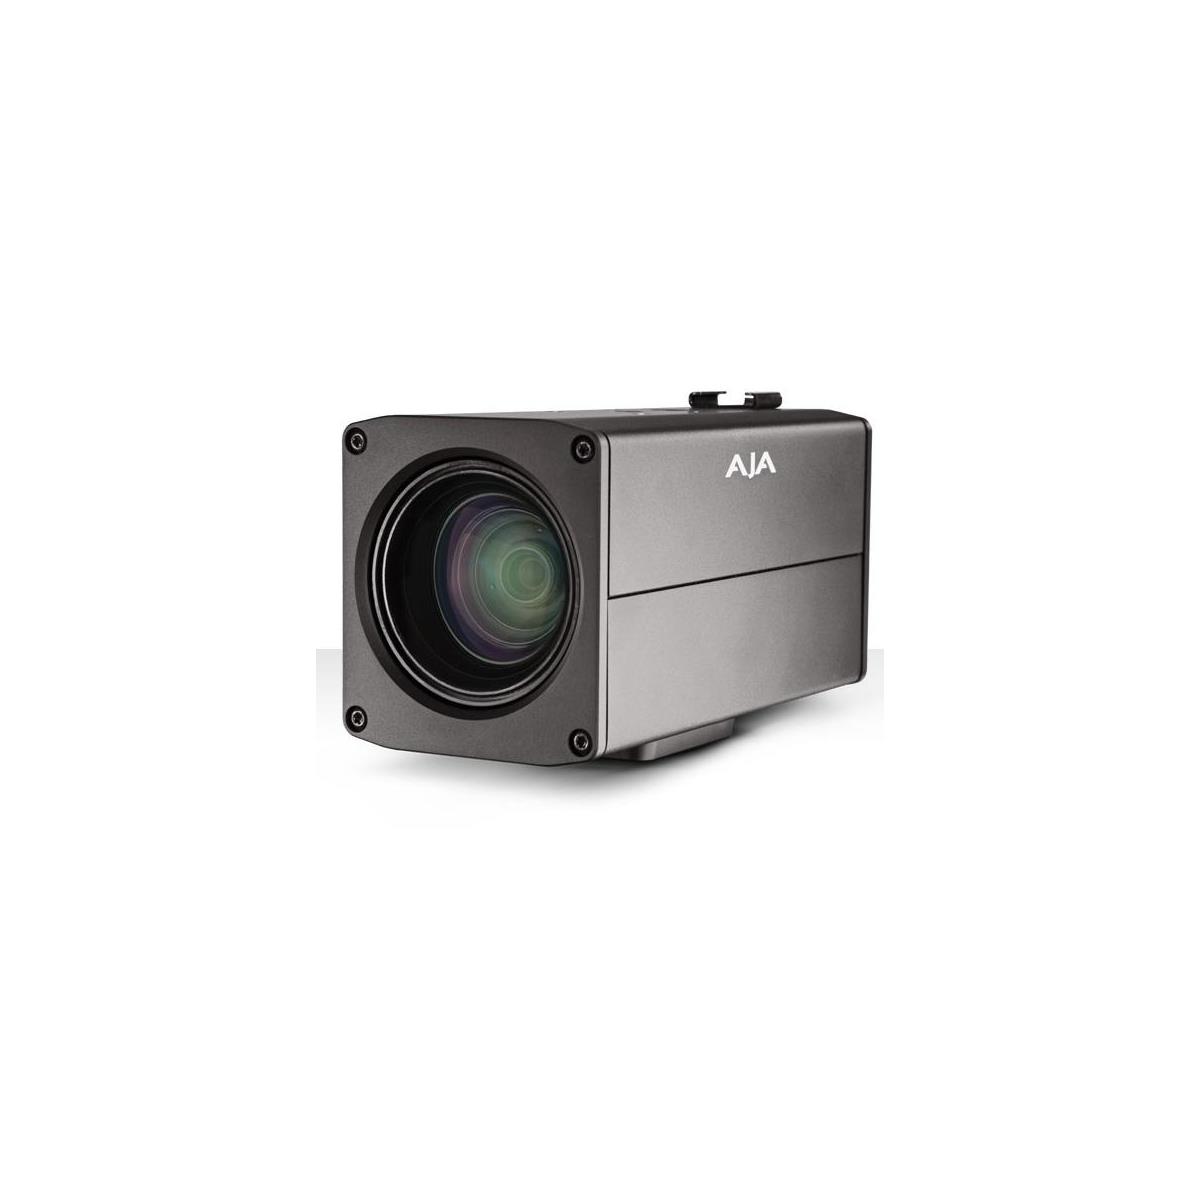 Image of AJA RovoCam Integrated 4K/HD Camera with HDBaseT